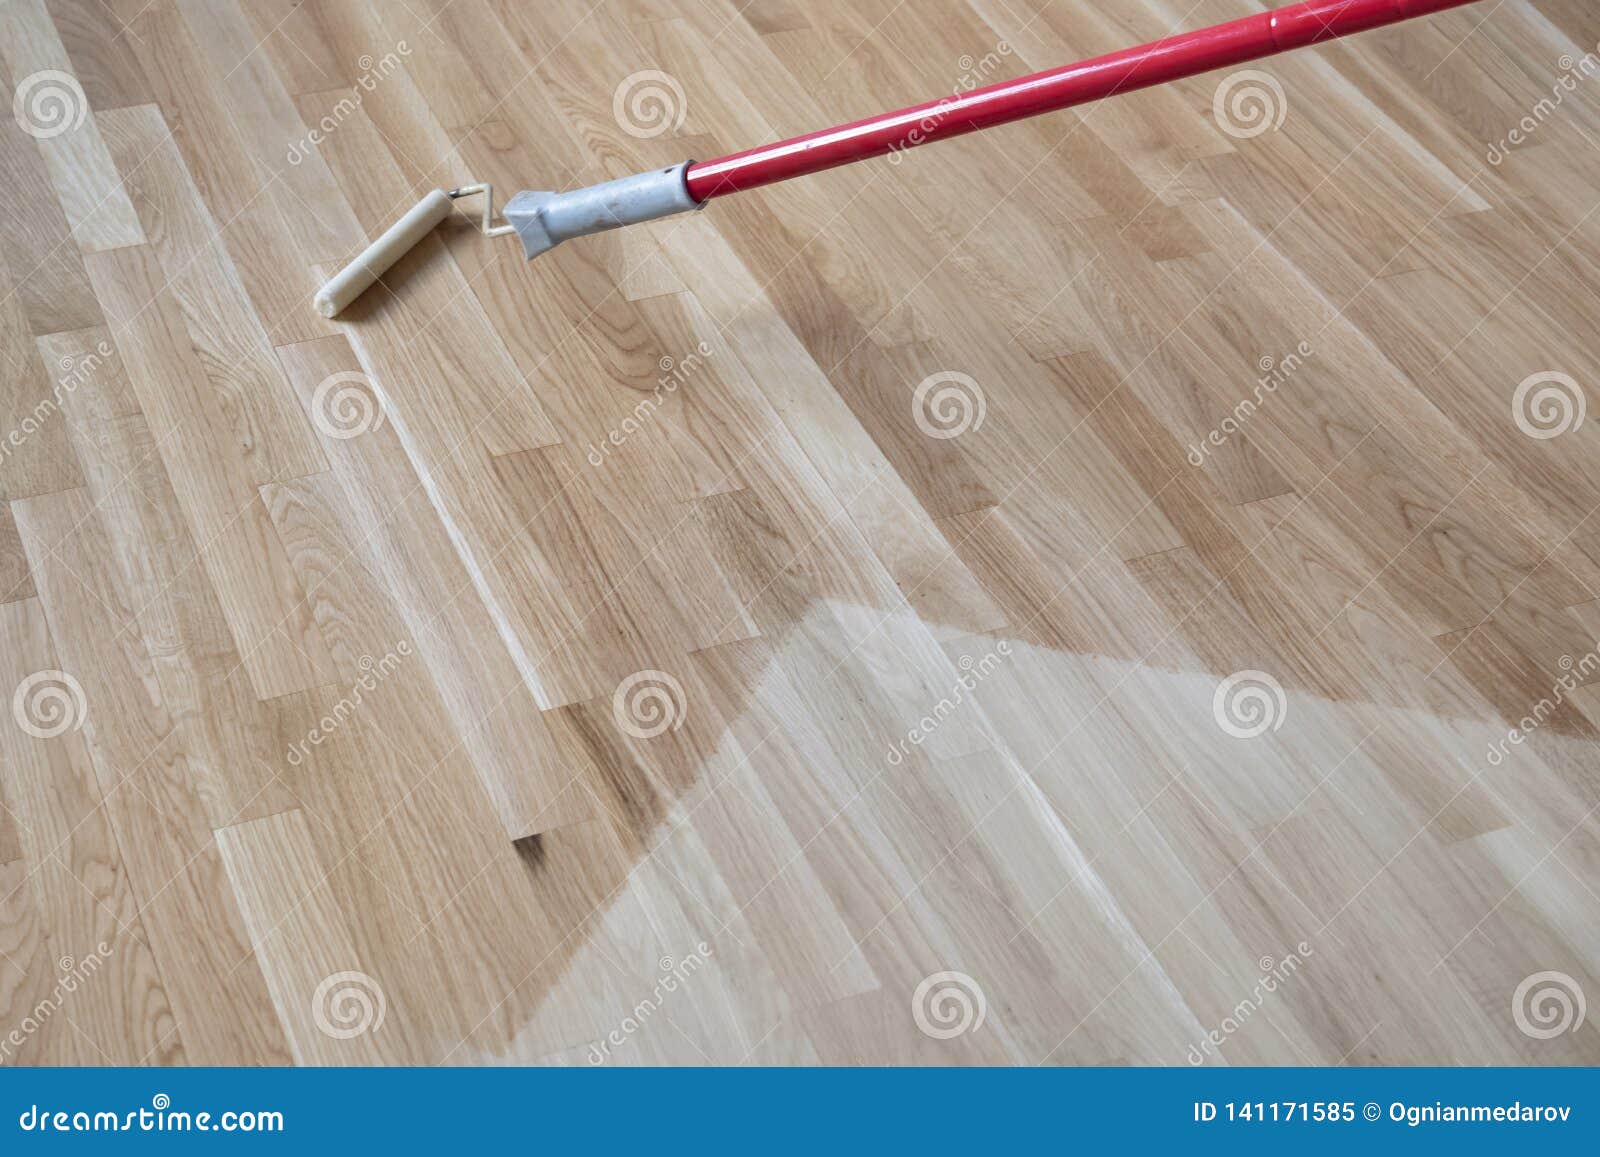 Lacquering Varnishing Parquet Floor Stock Image Image Of